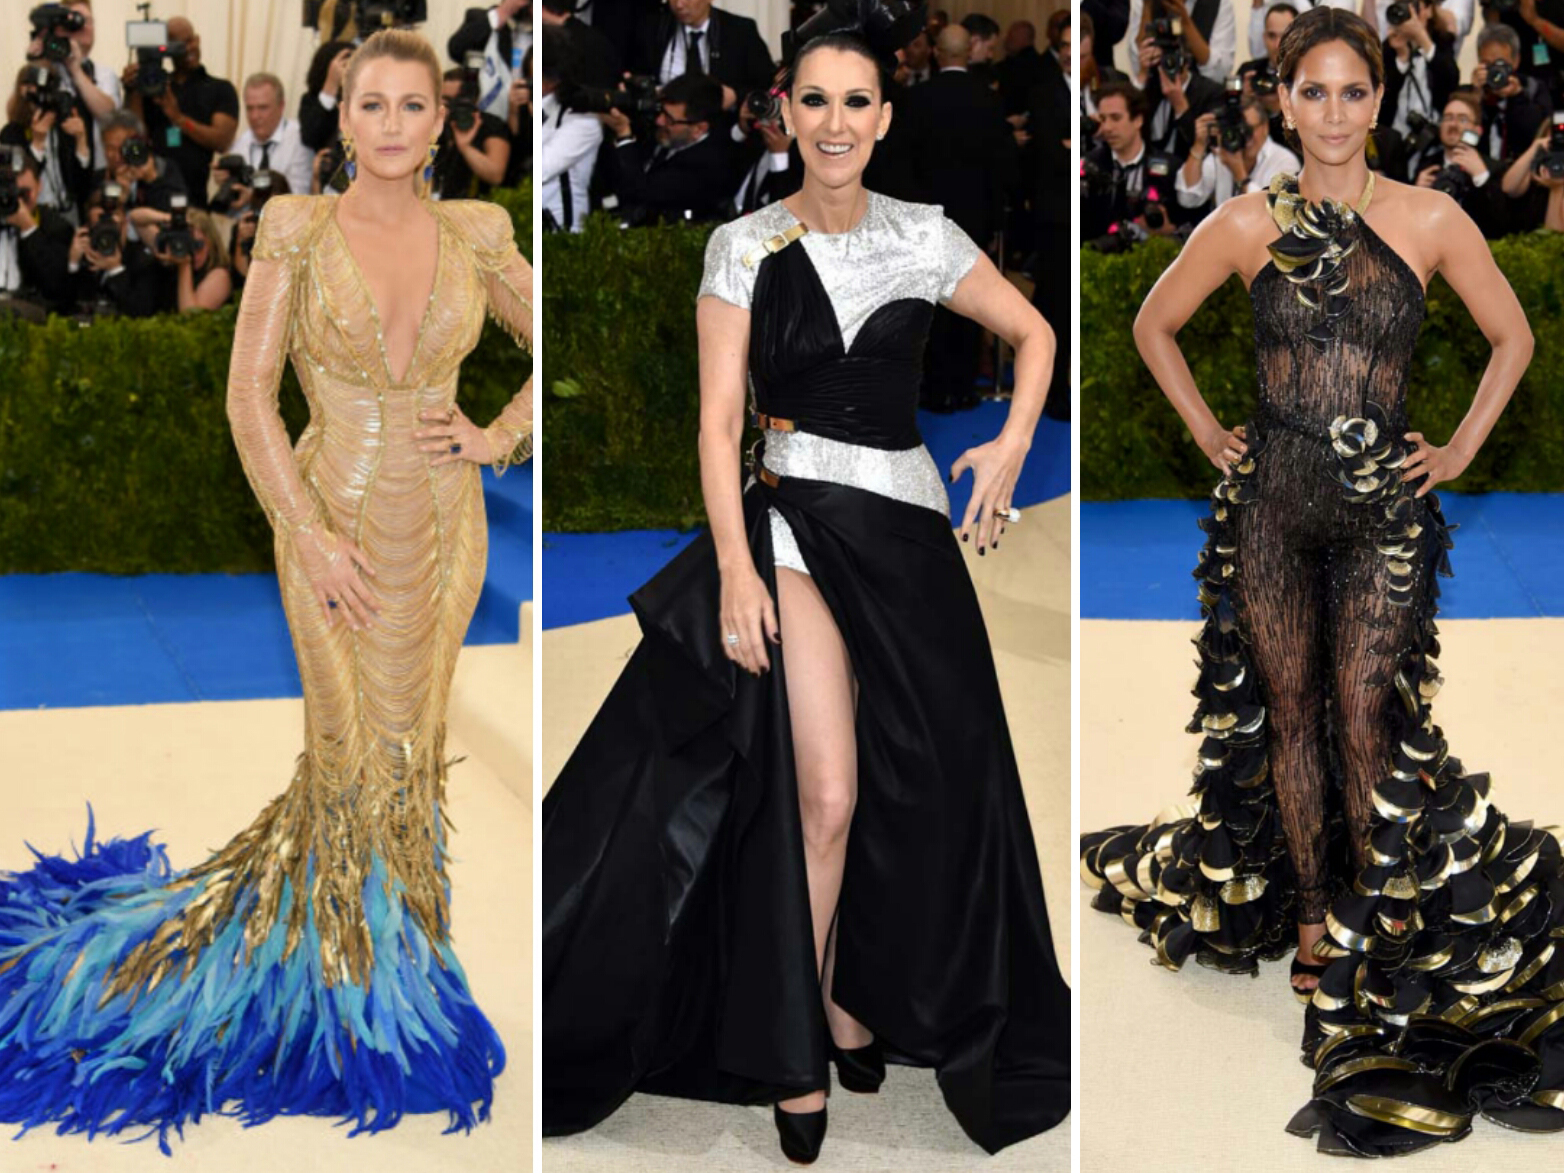 Blake Lively, Celine Dion and Halle Berry in Versace Atelier dresses